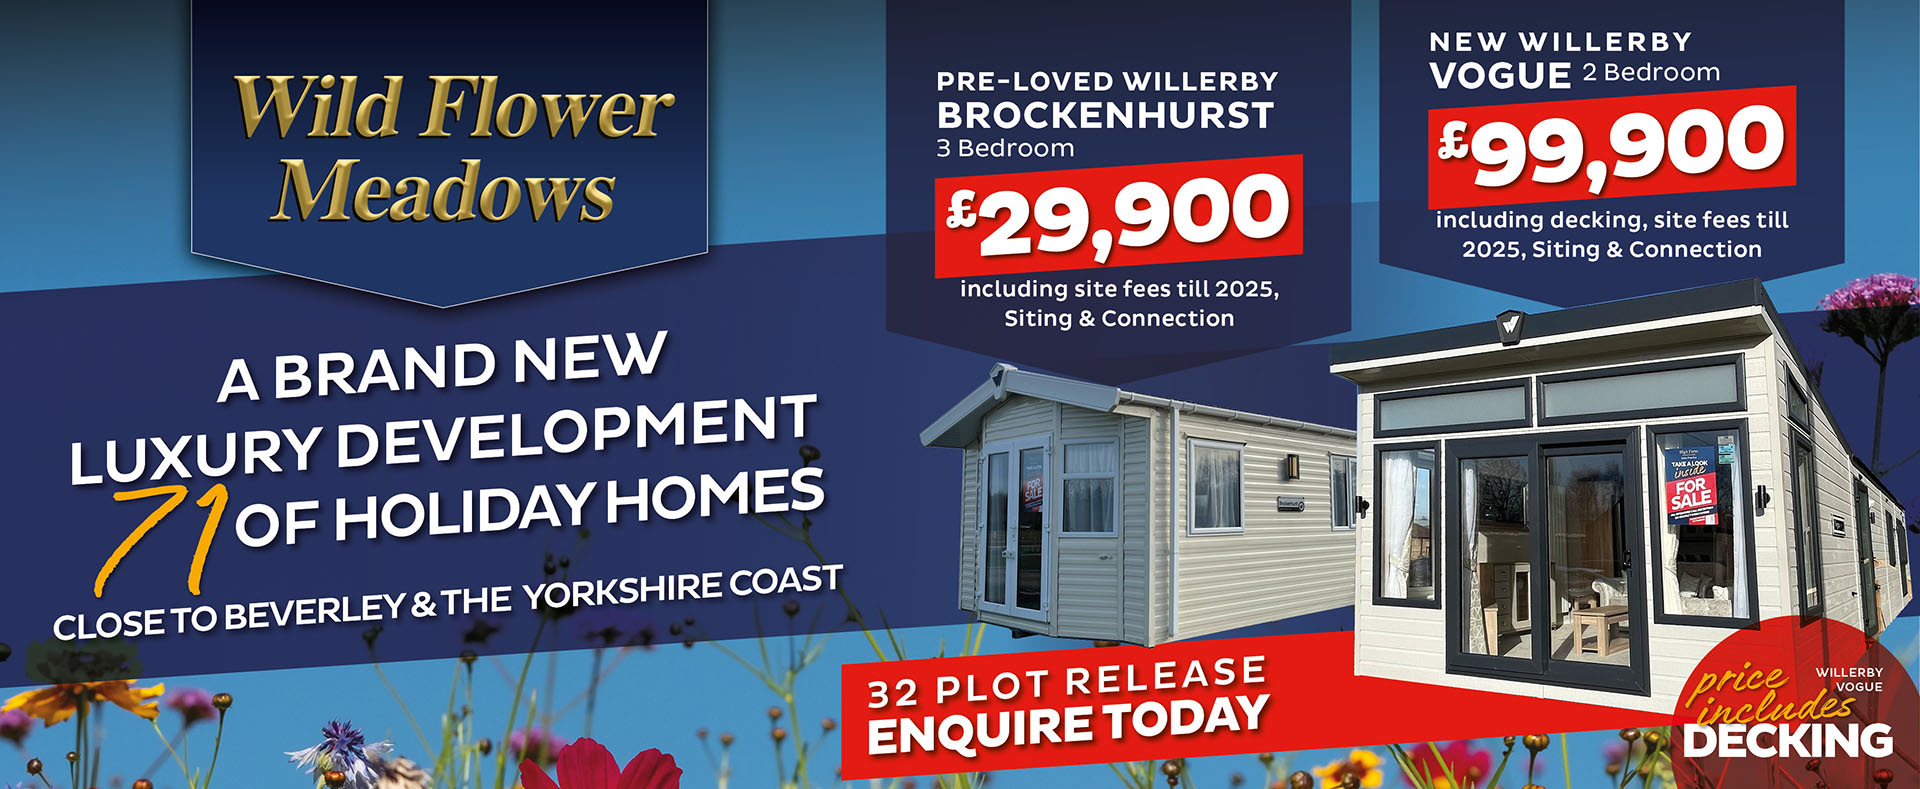 A brand new luxury development of 71 holiday homes close to Beverley and the Yorkshire coast.